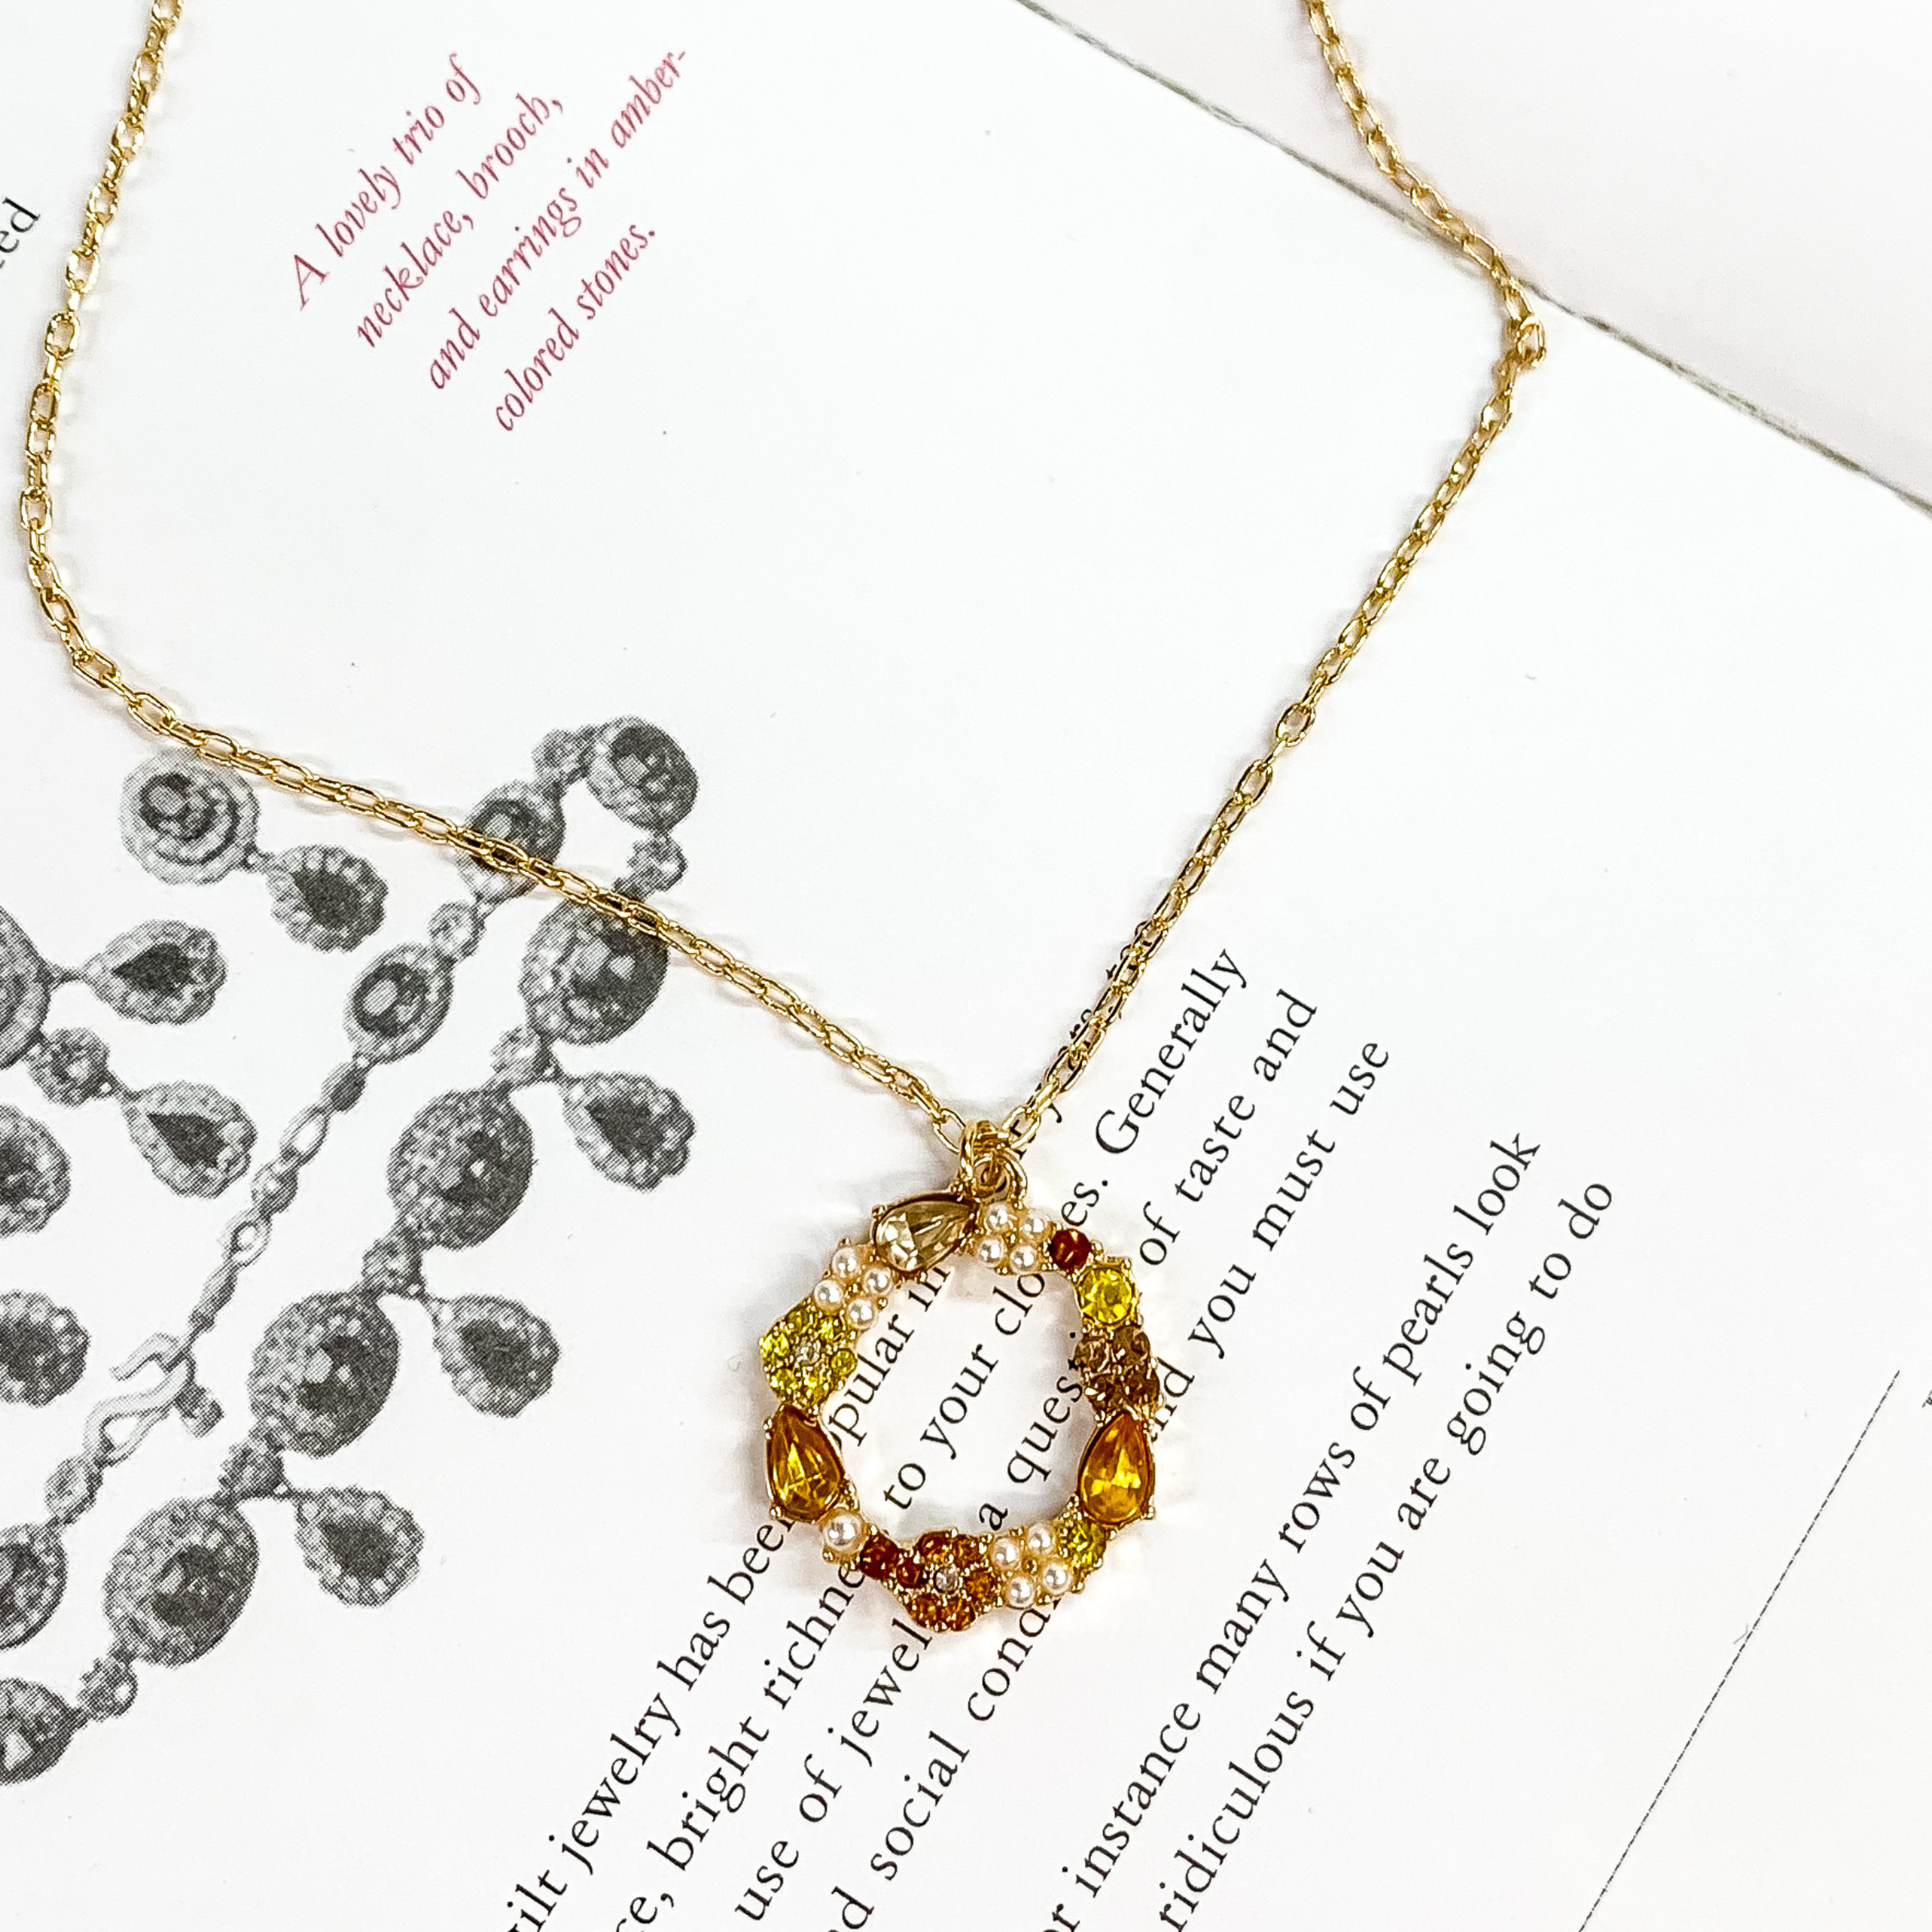 Gold Tone Chain Necklace and Open Circle Pendant with Topaz Crystals - Giddy Up Glamour Boutique